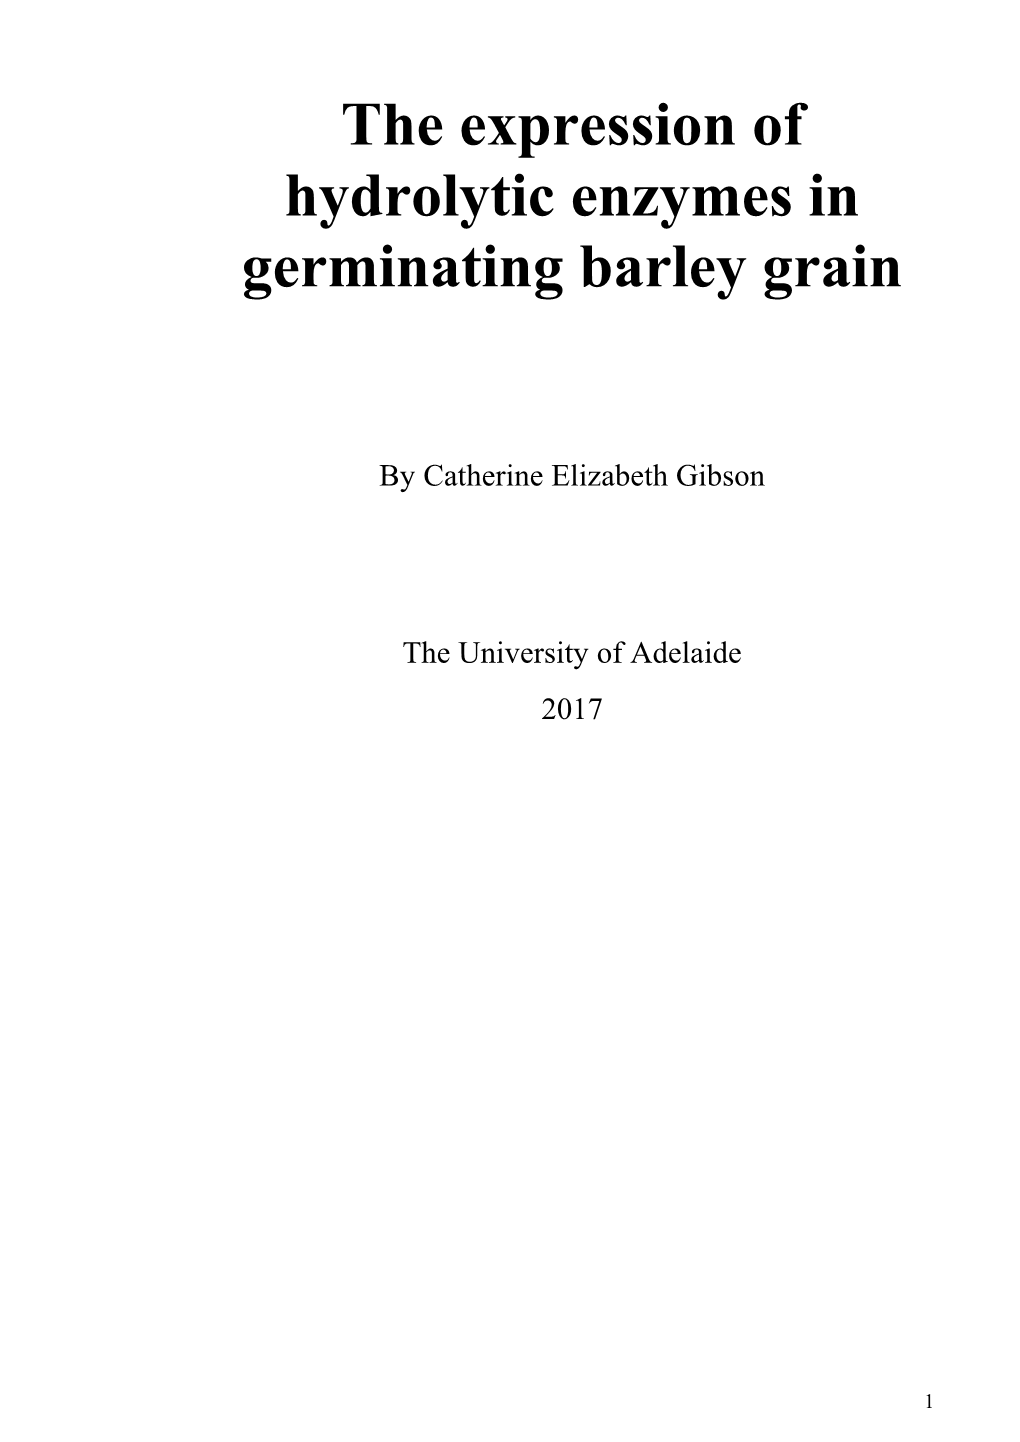 The Expression of Hydrolytic Enzymes in Germinating Barley Grain